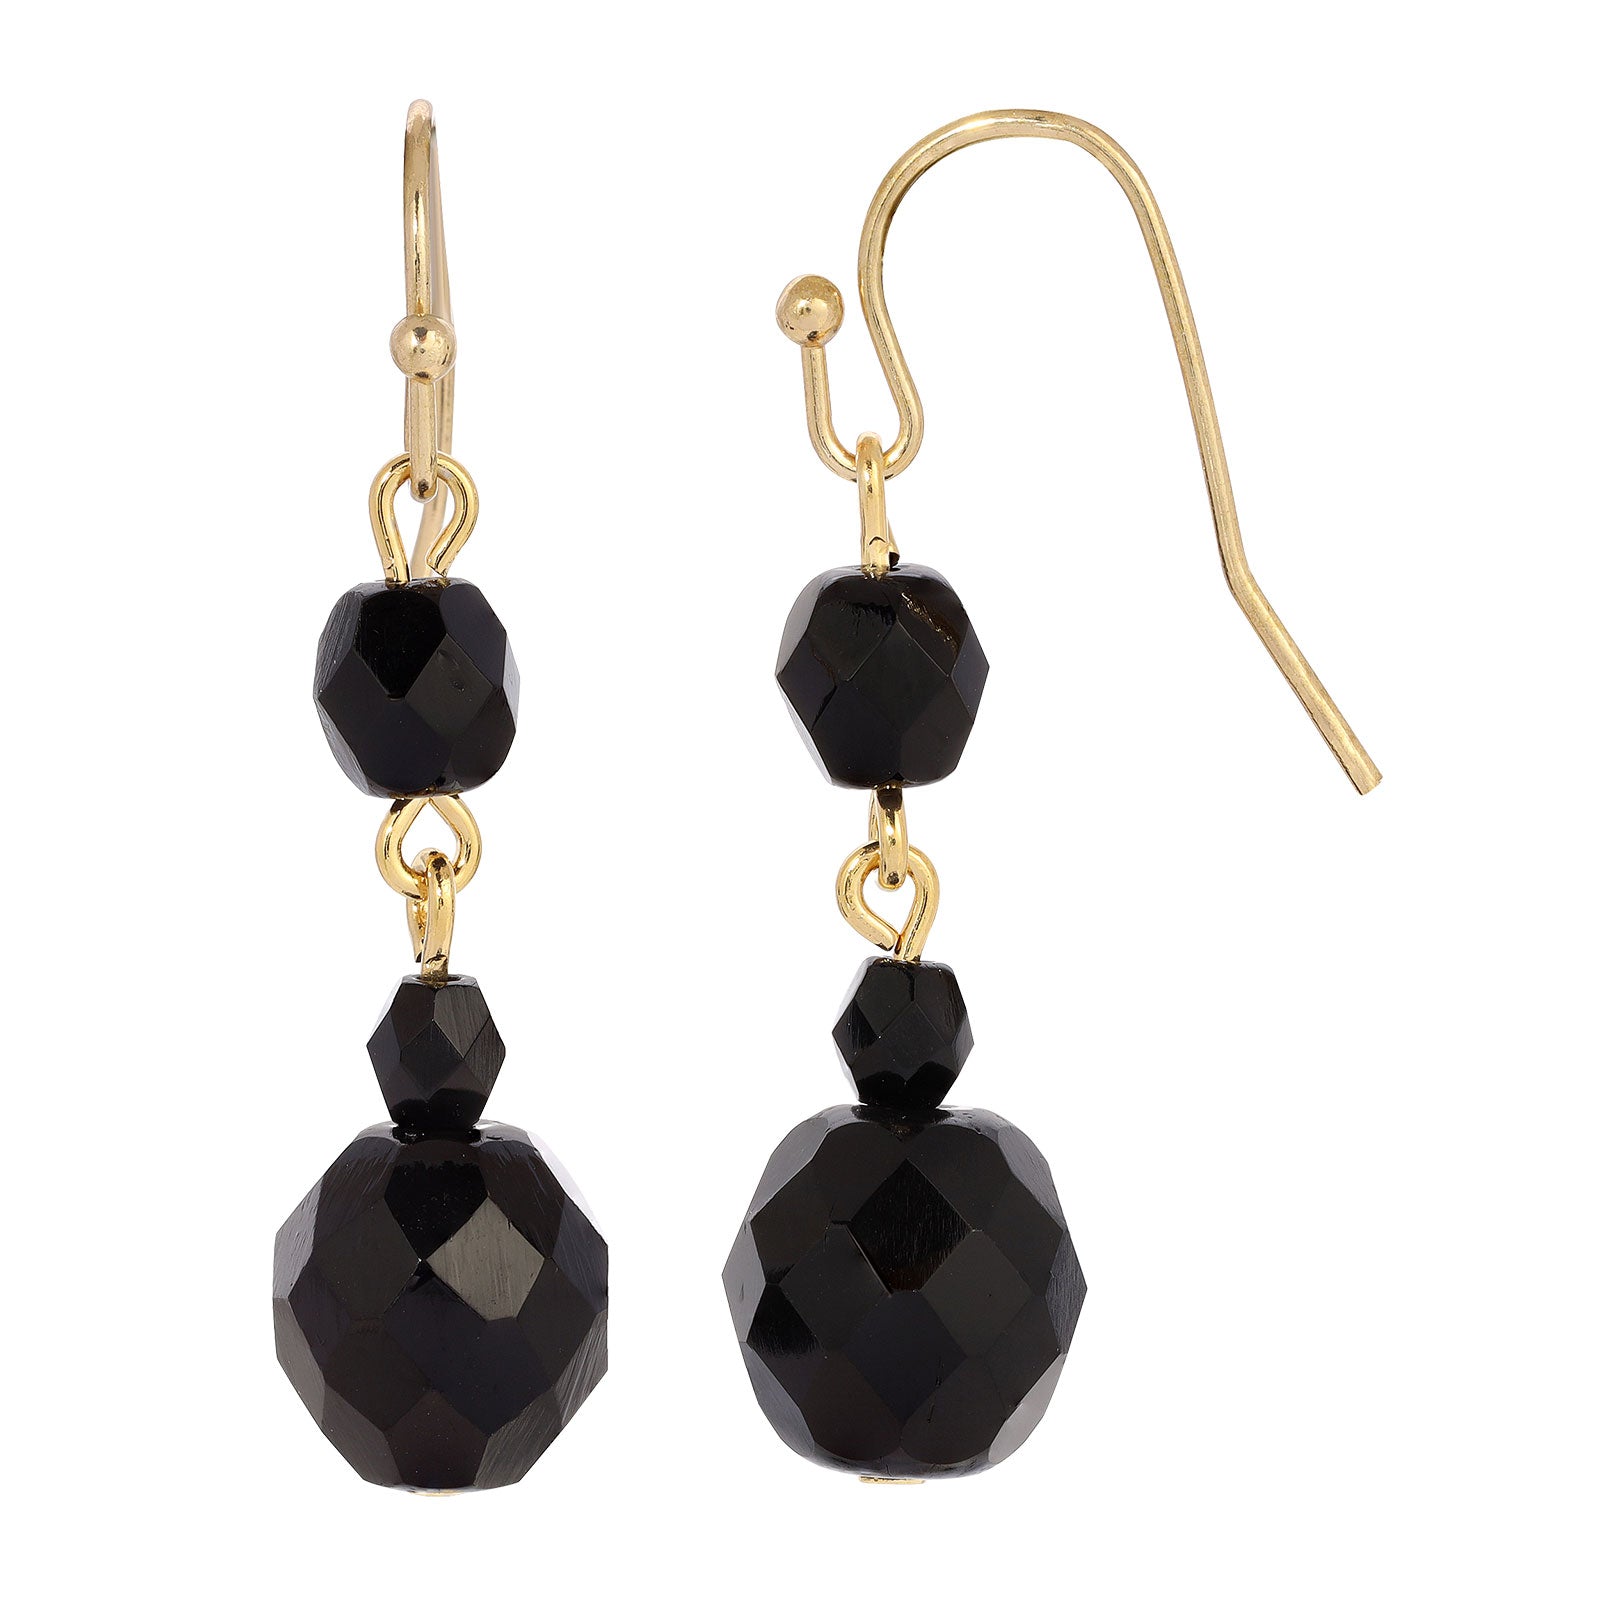 Black Rhodium Cube with Teal Glass Cube Beads Earrings - Walmart.com